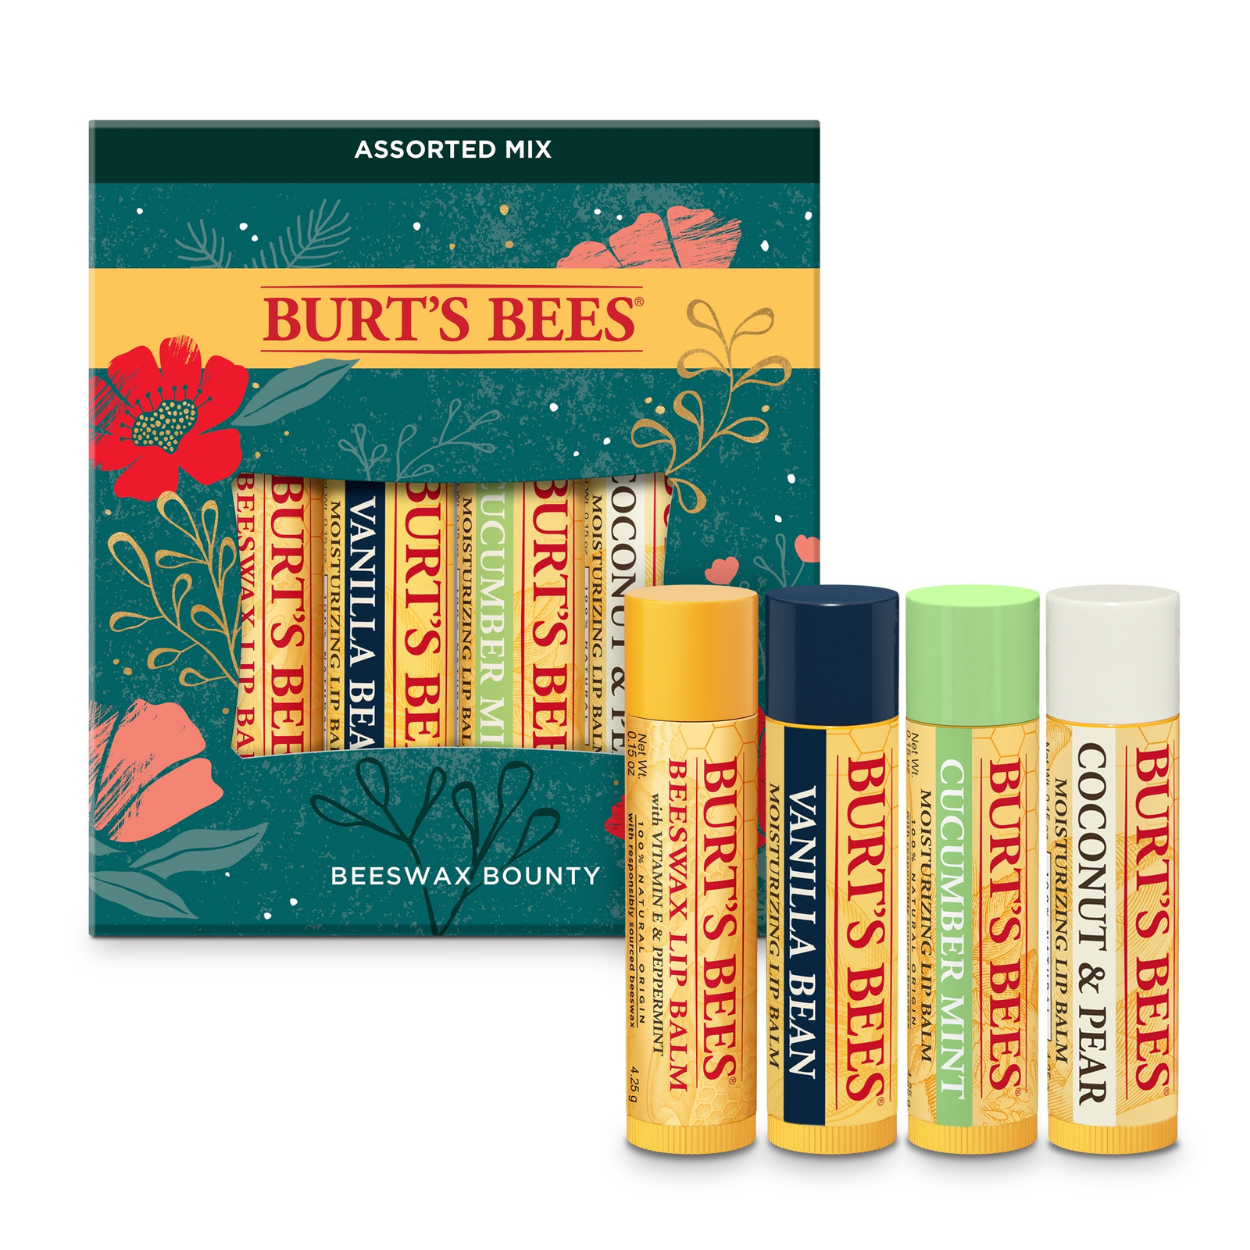 Beeswax Bounty – Assorted Mix